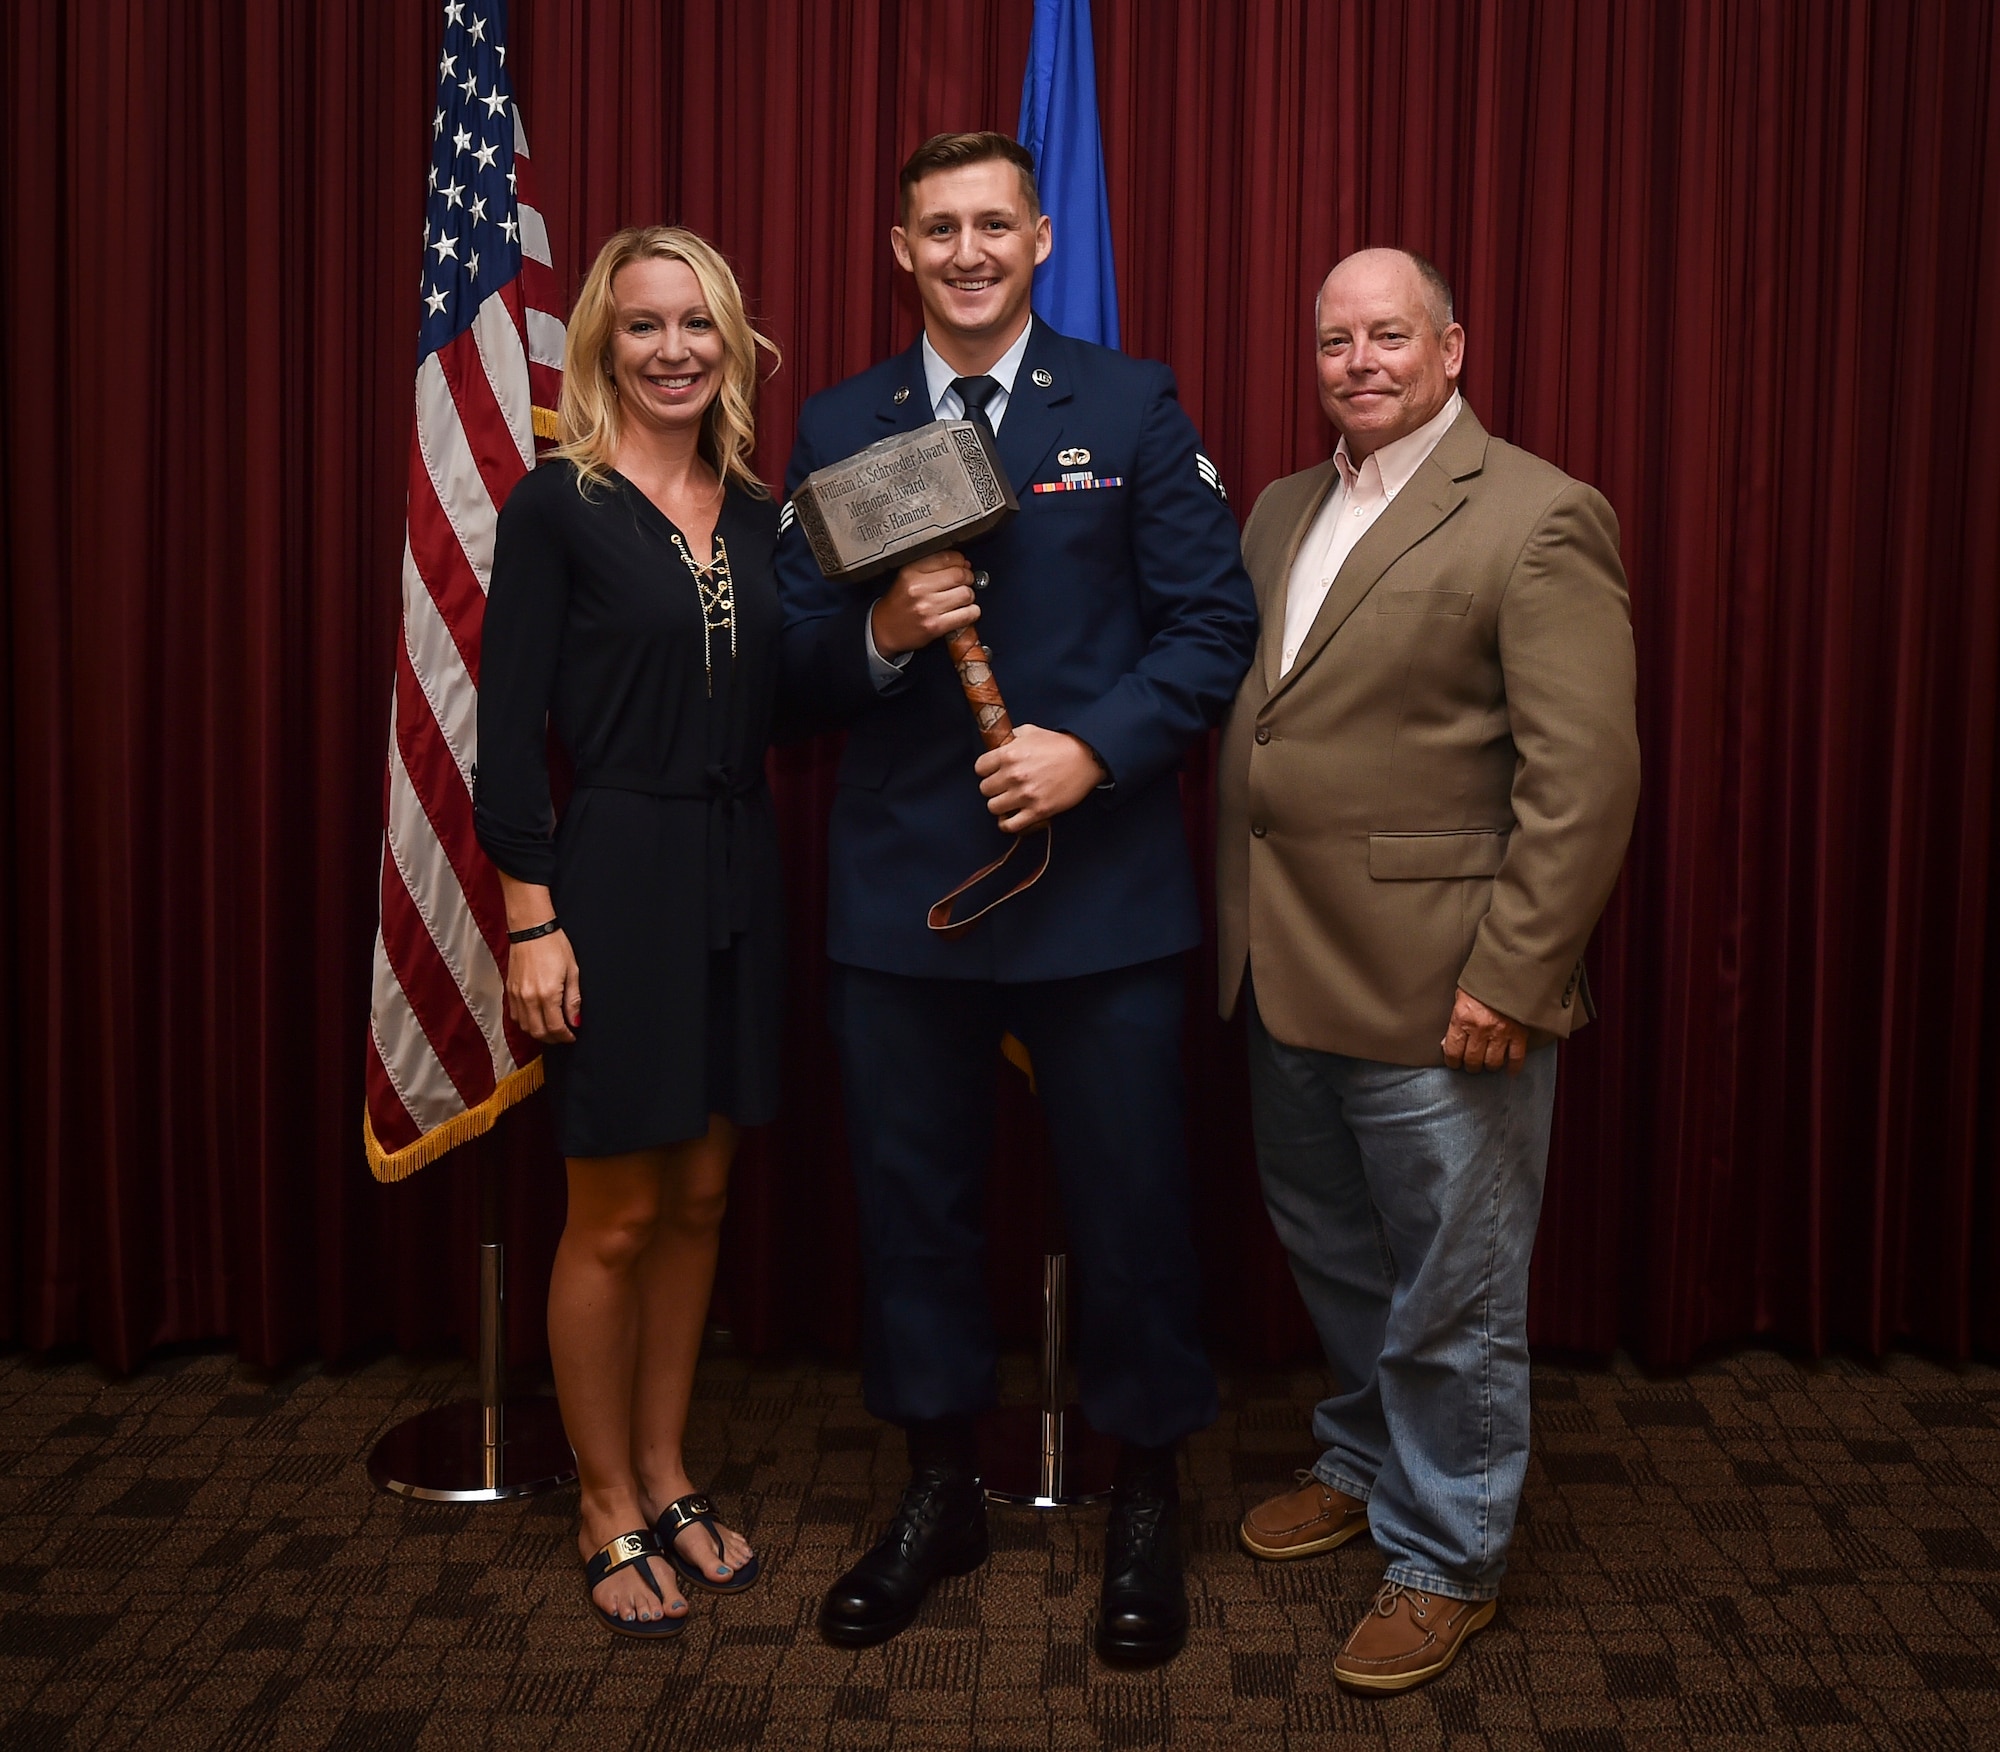 Senior Airman John Campbell, Special Operations Weather Team student assigned to the Special Tactics Training Squadron, accepts the first Lt. Col. William Schroeder Memorial Award from Abby Schroeder, Schoeder's widow, , and John Farris, a SOWT instructor with STTS, at Hurlburt Field, Fla., July 21, 2016. Schroeder served as a special operations weather officer and previously commanded the 10th Combat Weather Squadron here. He sacrificed his life when he was fatally shot protecting coworkers from a workplace violence incident at Joint Base San Antonio-Lackland, Texas. (U.S. Air Force photo by Senior Airman Ryan Conroy) 